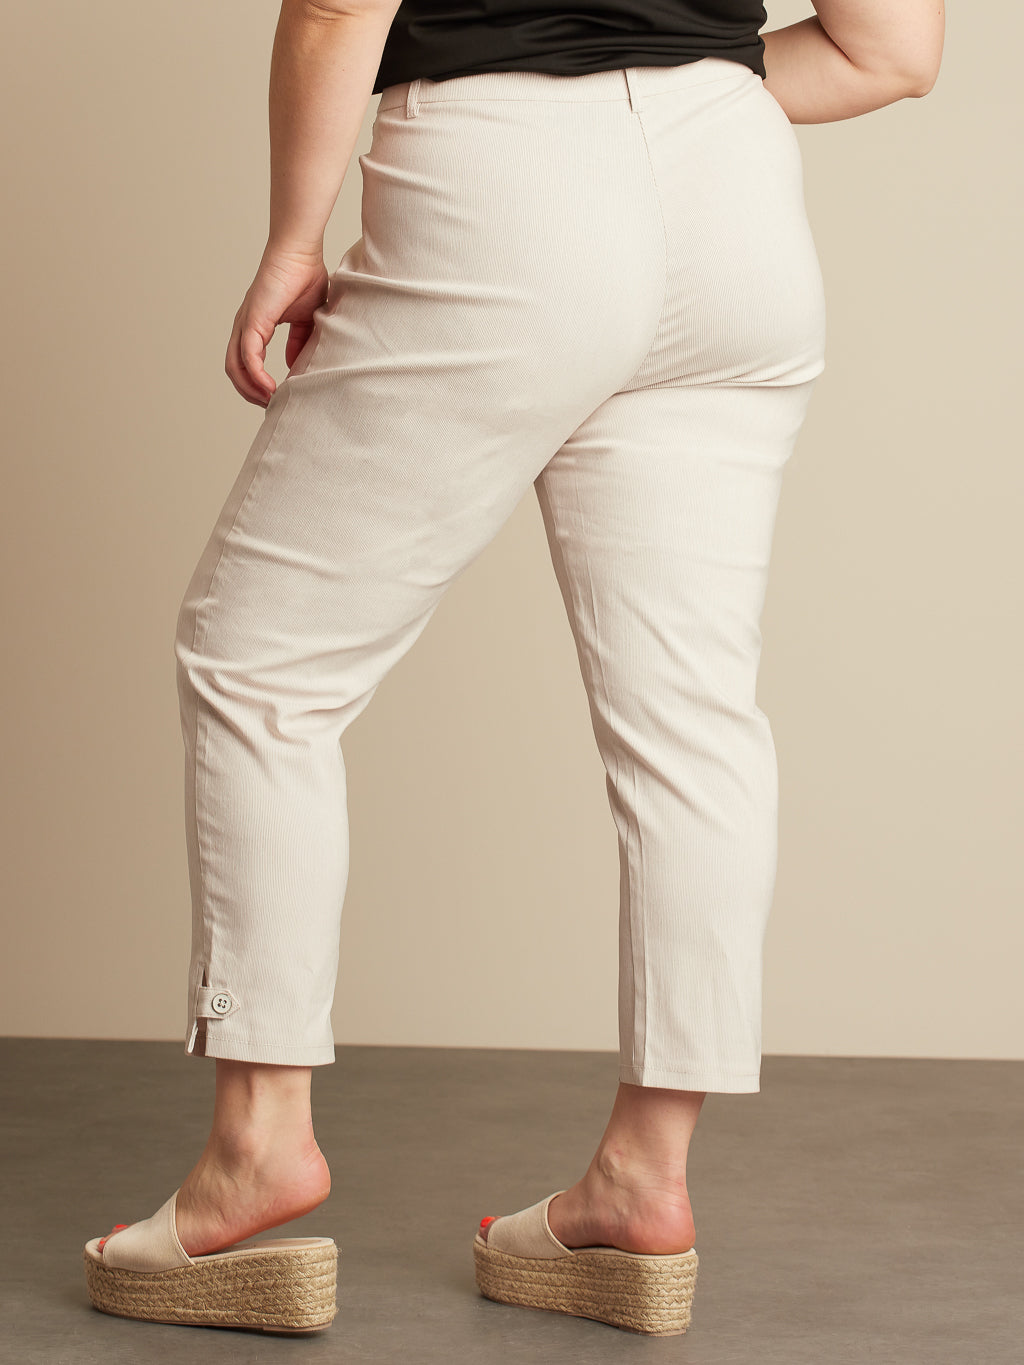 Semi-fitted 7/8 pant